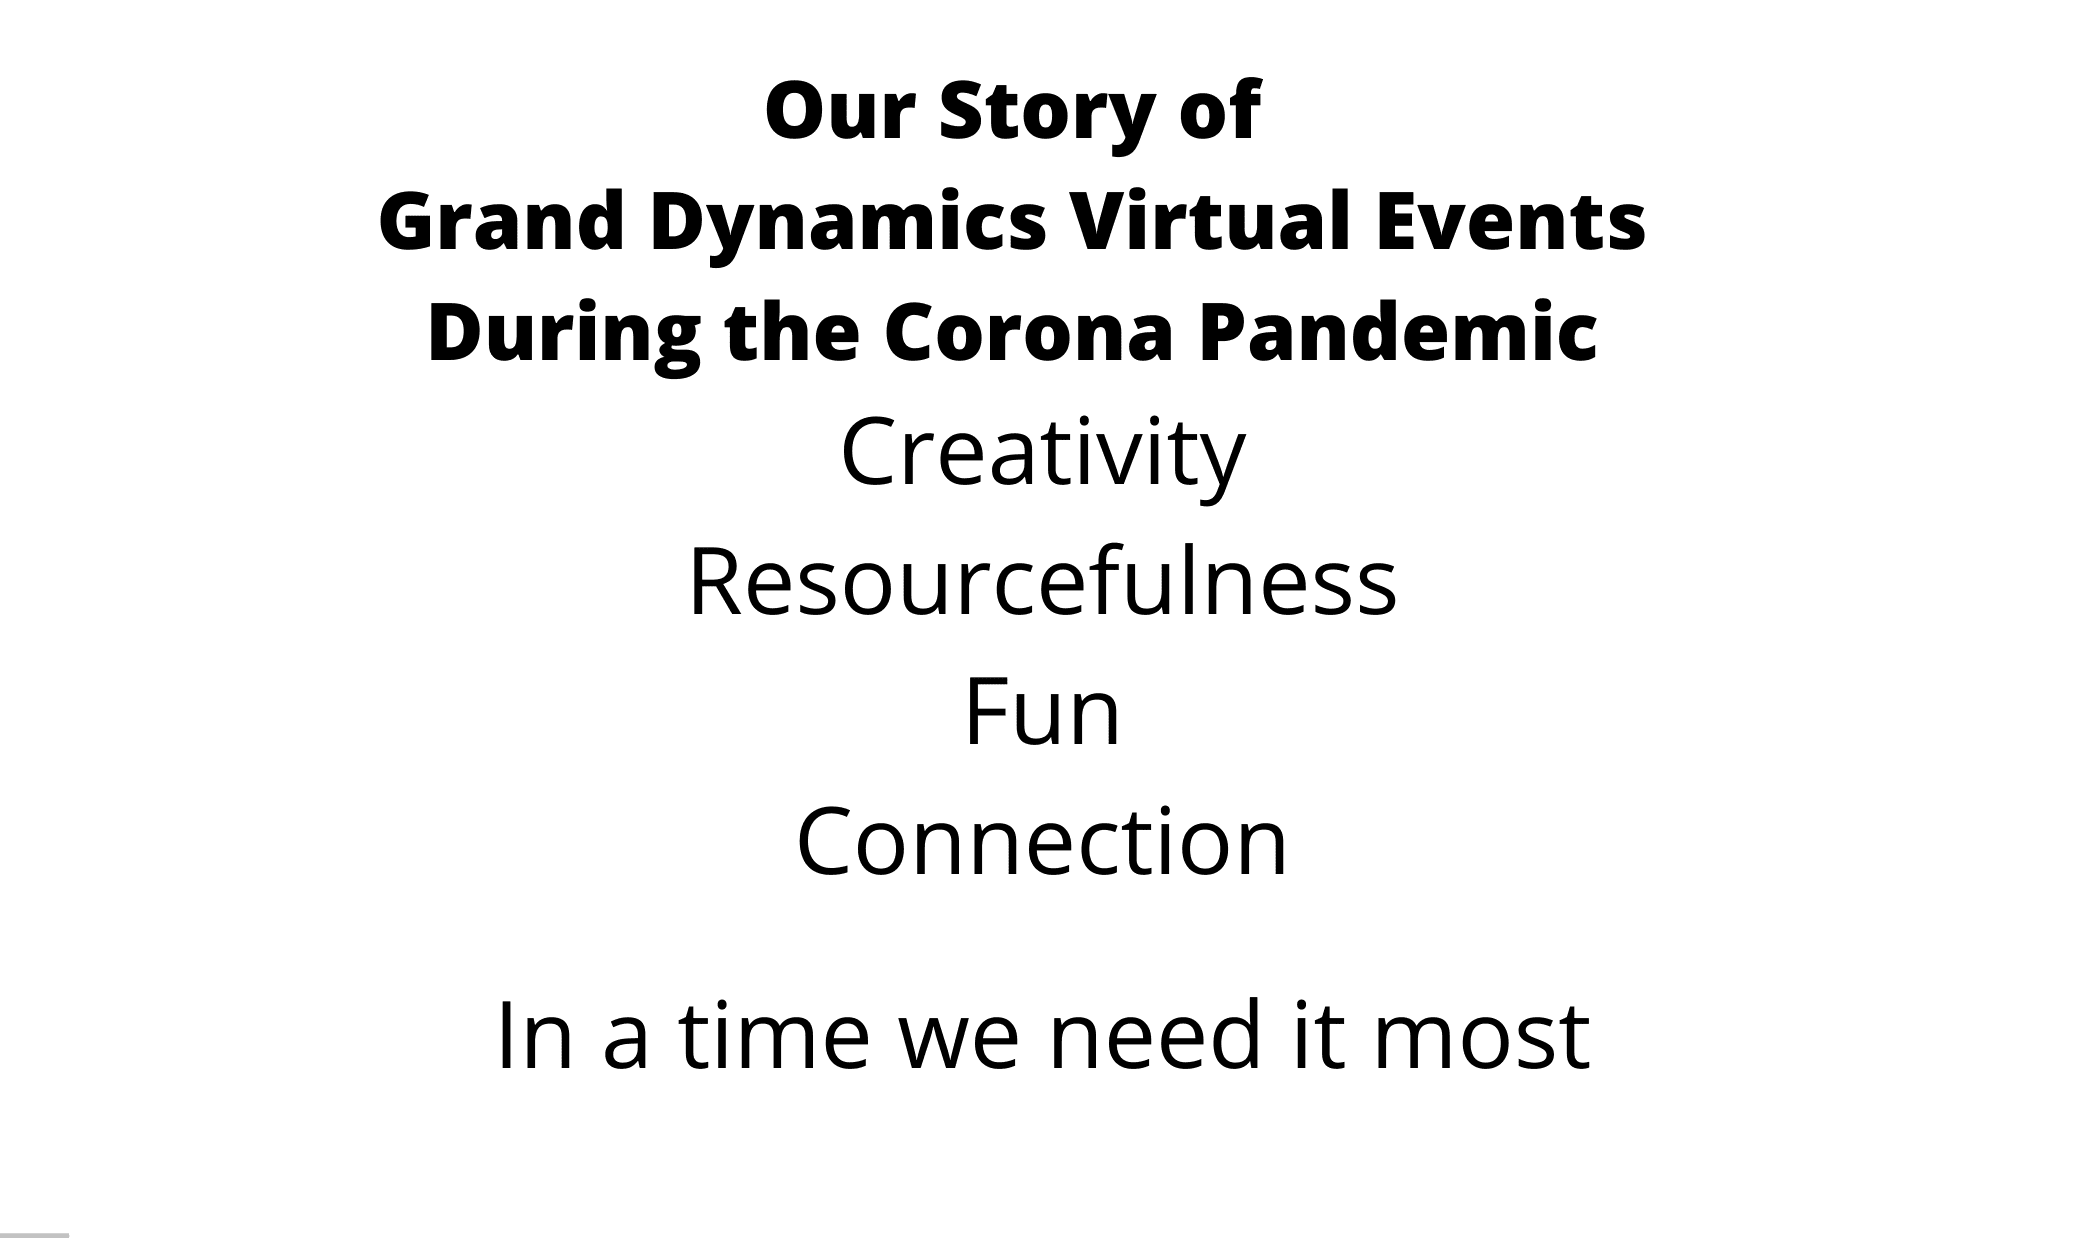 How Grand Dynamics Virtual Events Bring Creativity, Optimism, Inspiration, and Connection to People Around the World During Corona Times